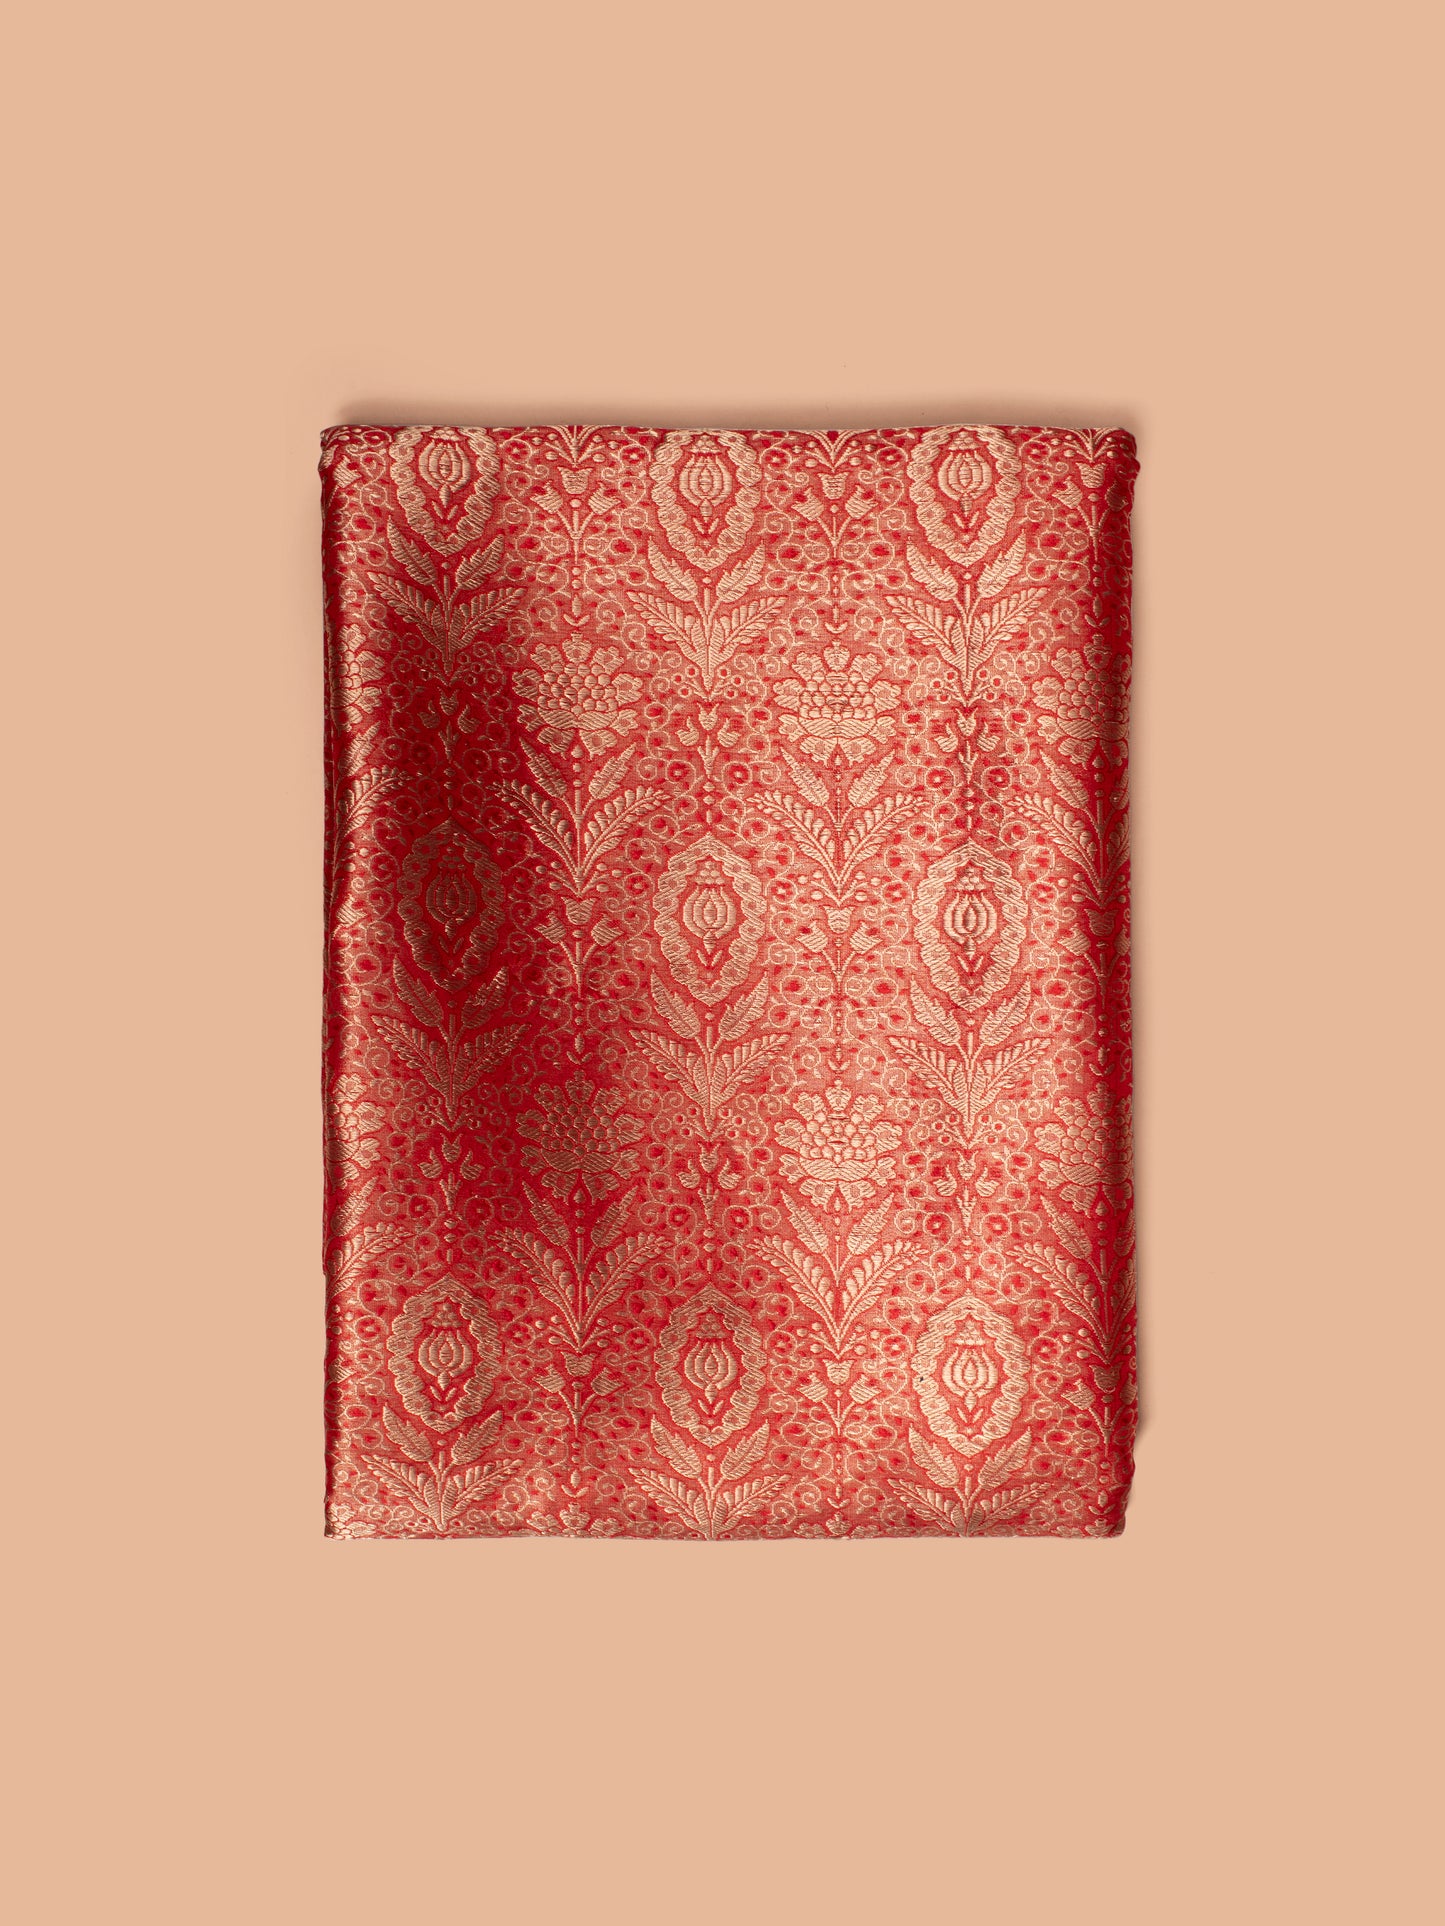 Handwoven Red Tissue Fabric